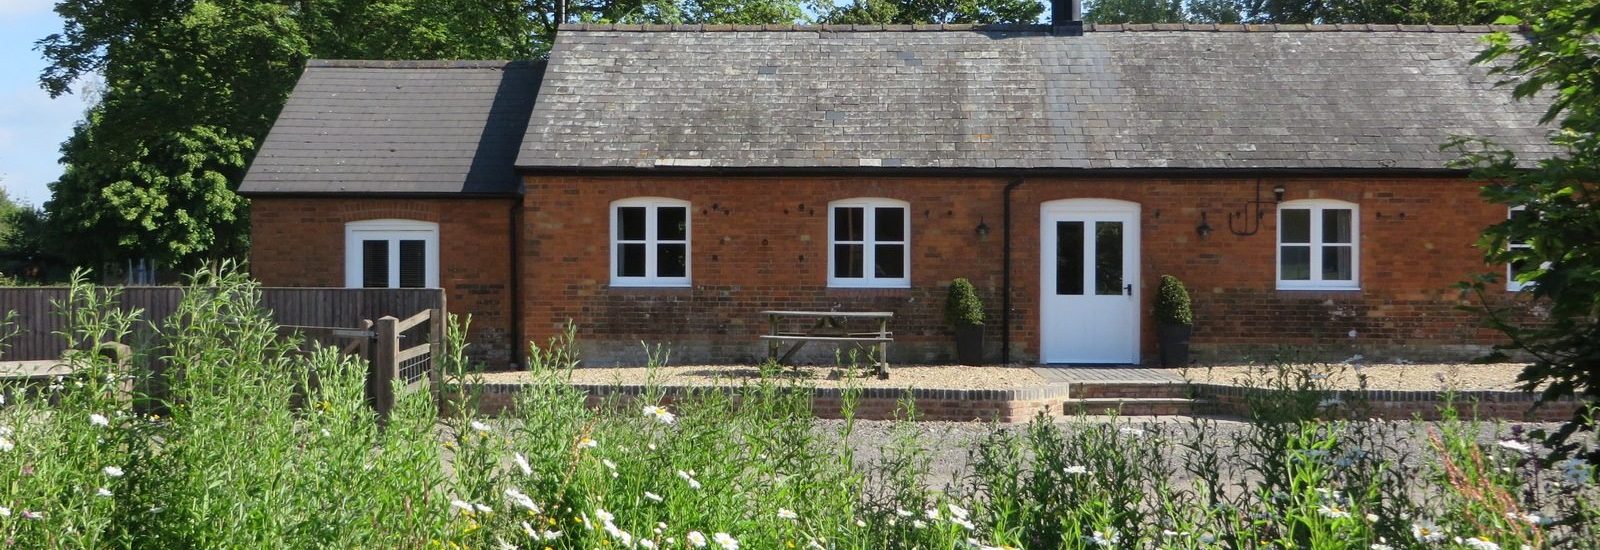 Self Catering Holiday Accommodation Near Marlborough Wiltshire